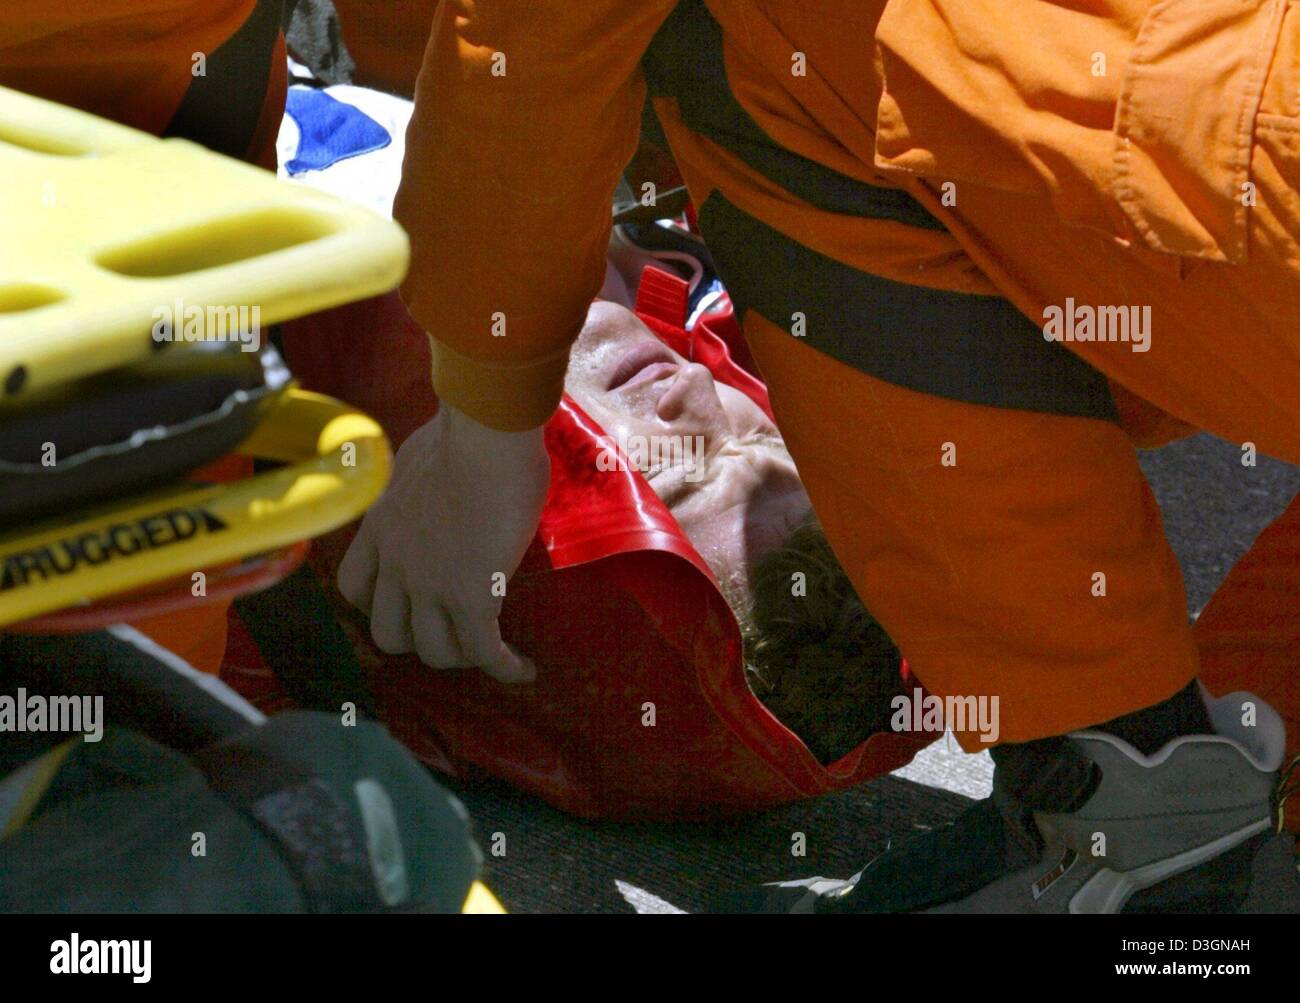 (dpa) - Paramedics and members of the safety team position German formula one pilot Ralf Schumacher of BMW-Williams on a stretcher after his accident during the US Grand Prix on the racetrack in Indianapolis, USA, 20 June 2004. Ralf Schumach ran with top speed of around 300 kilometres per hour into a barrier along the racetrack in the tenth lap of the race. He suffered several brui Stock Photo